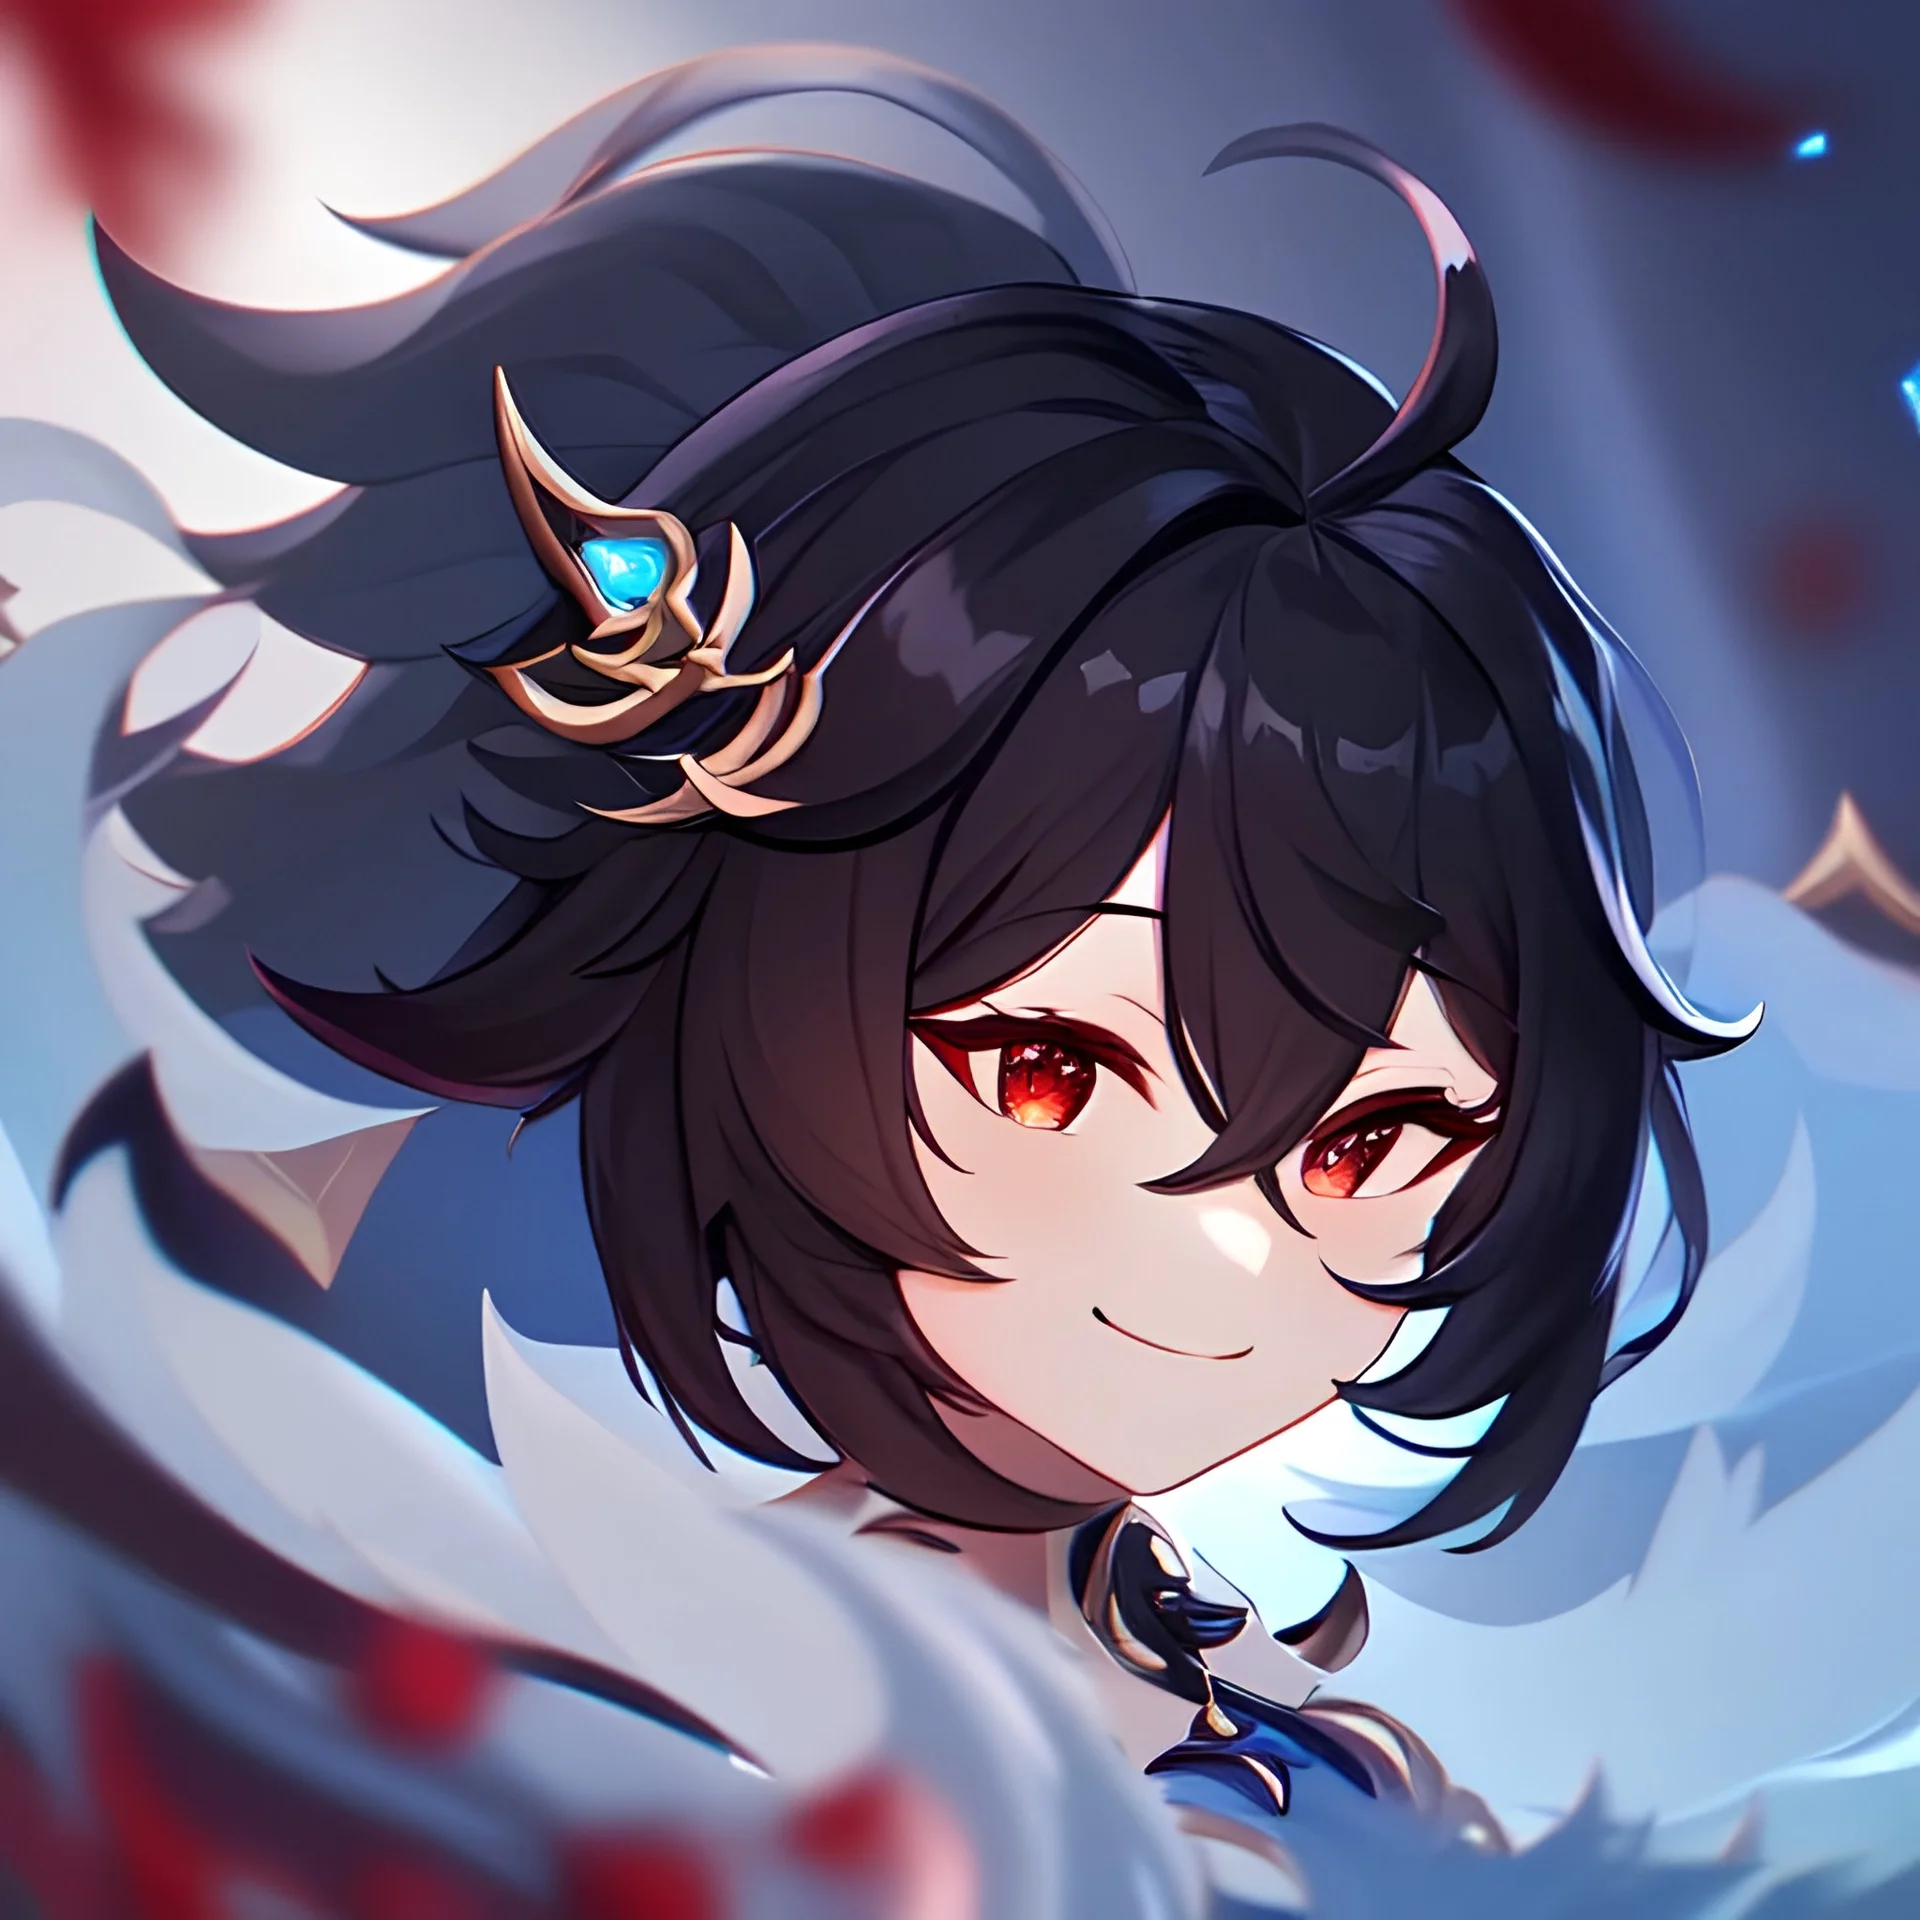 Clear focus,High resolution, black short fluffy hair, long fluffy bangs, and red eyes, Depressed girl, wearing a genshin impact outfit,slight revealing outfit, Smug smile, half closed eyes, smile, full body, Extreme close up, smiling, eyes close